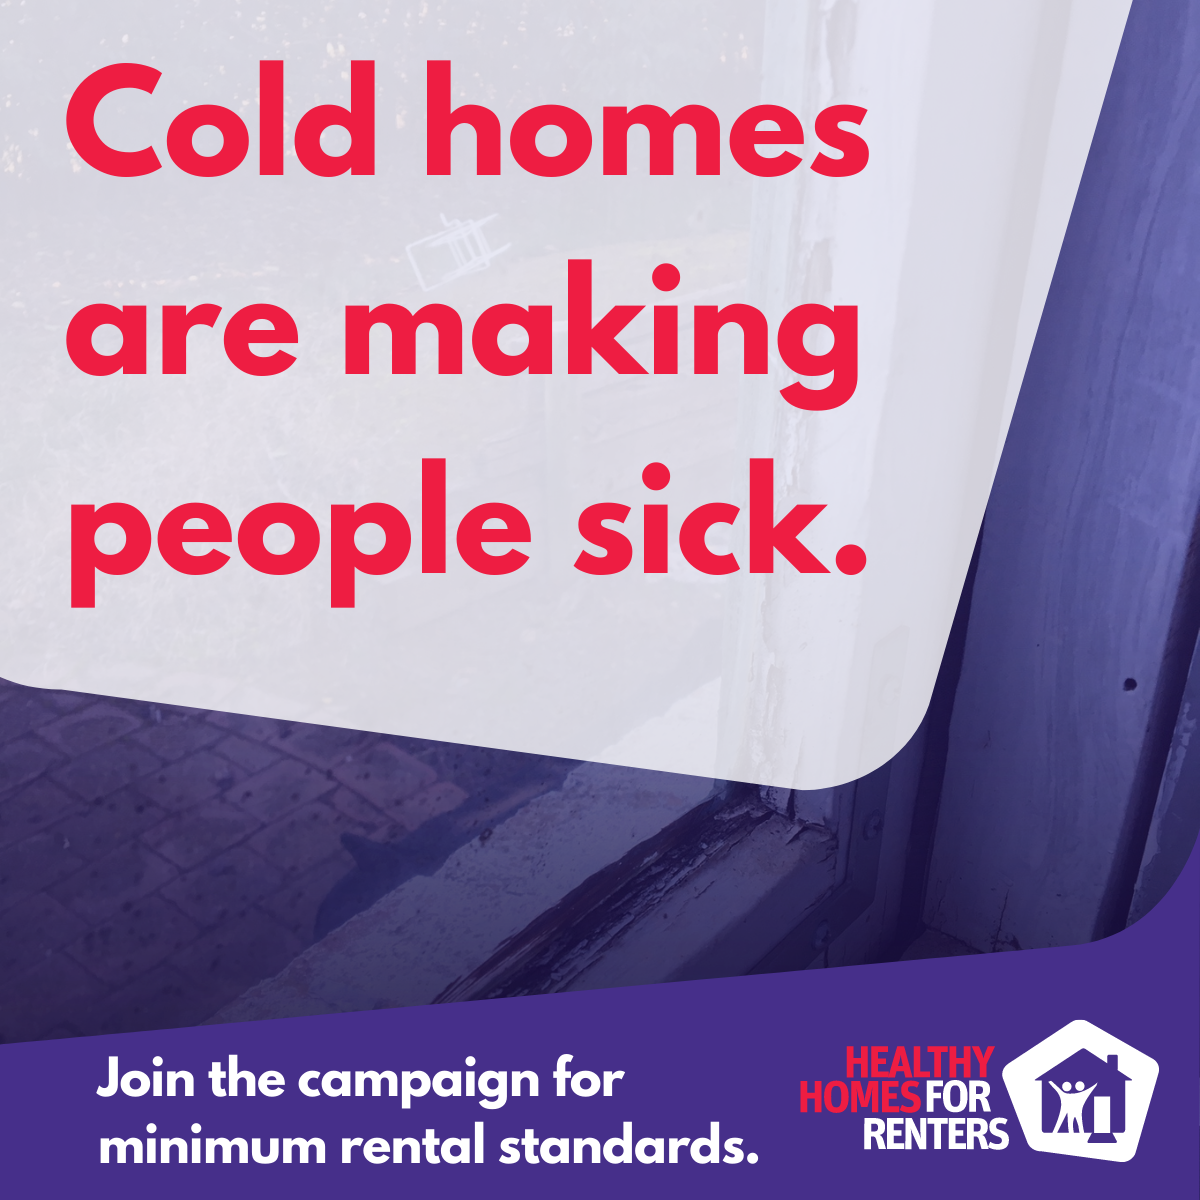 Cold homes are making people sick.